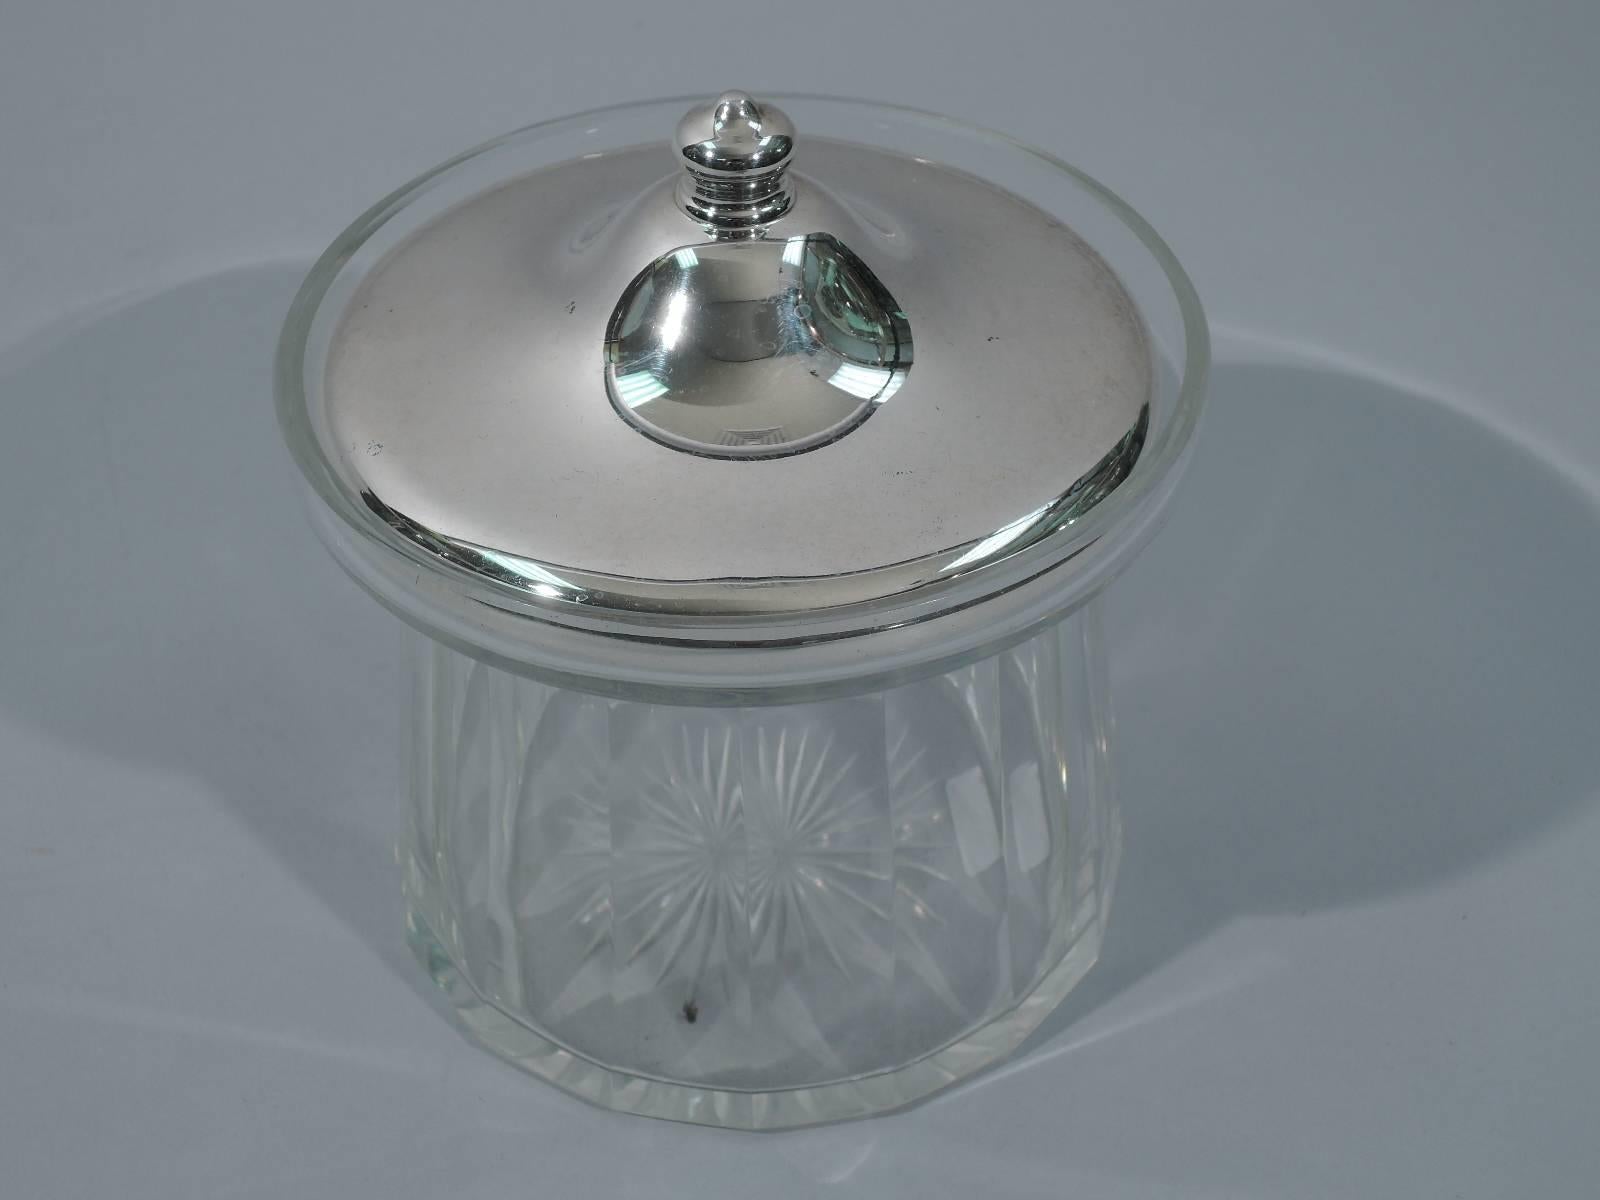 Clear glass jam jar with sterling silver cover. Made by R. Wallace & Sons in Wallingford, circa 1920. Round with fluted and upward tapering sides and short overhanging rim. Raised pavilion-form cover with finial. Cover interior gilt. Hallmark